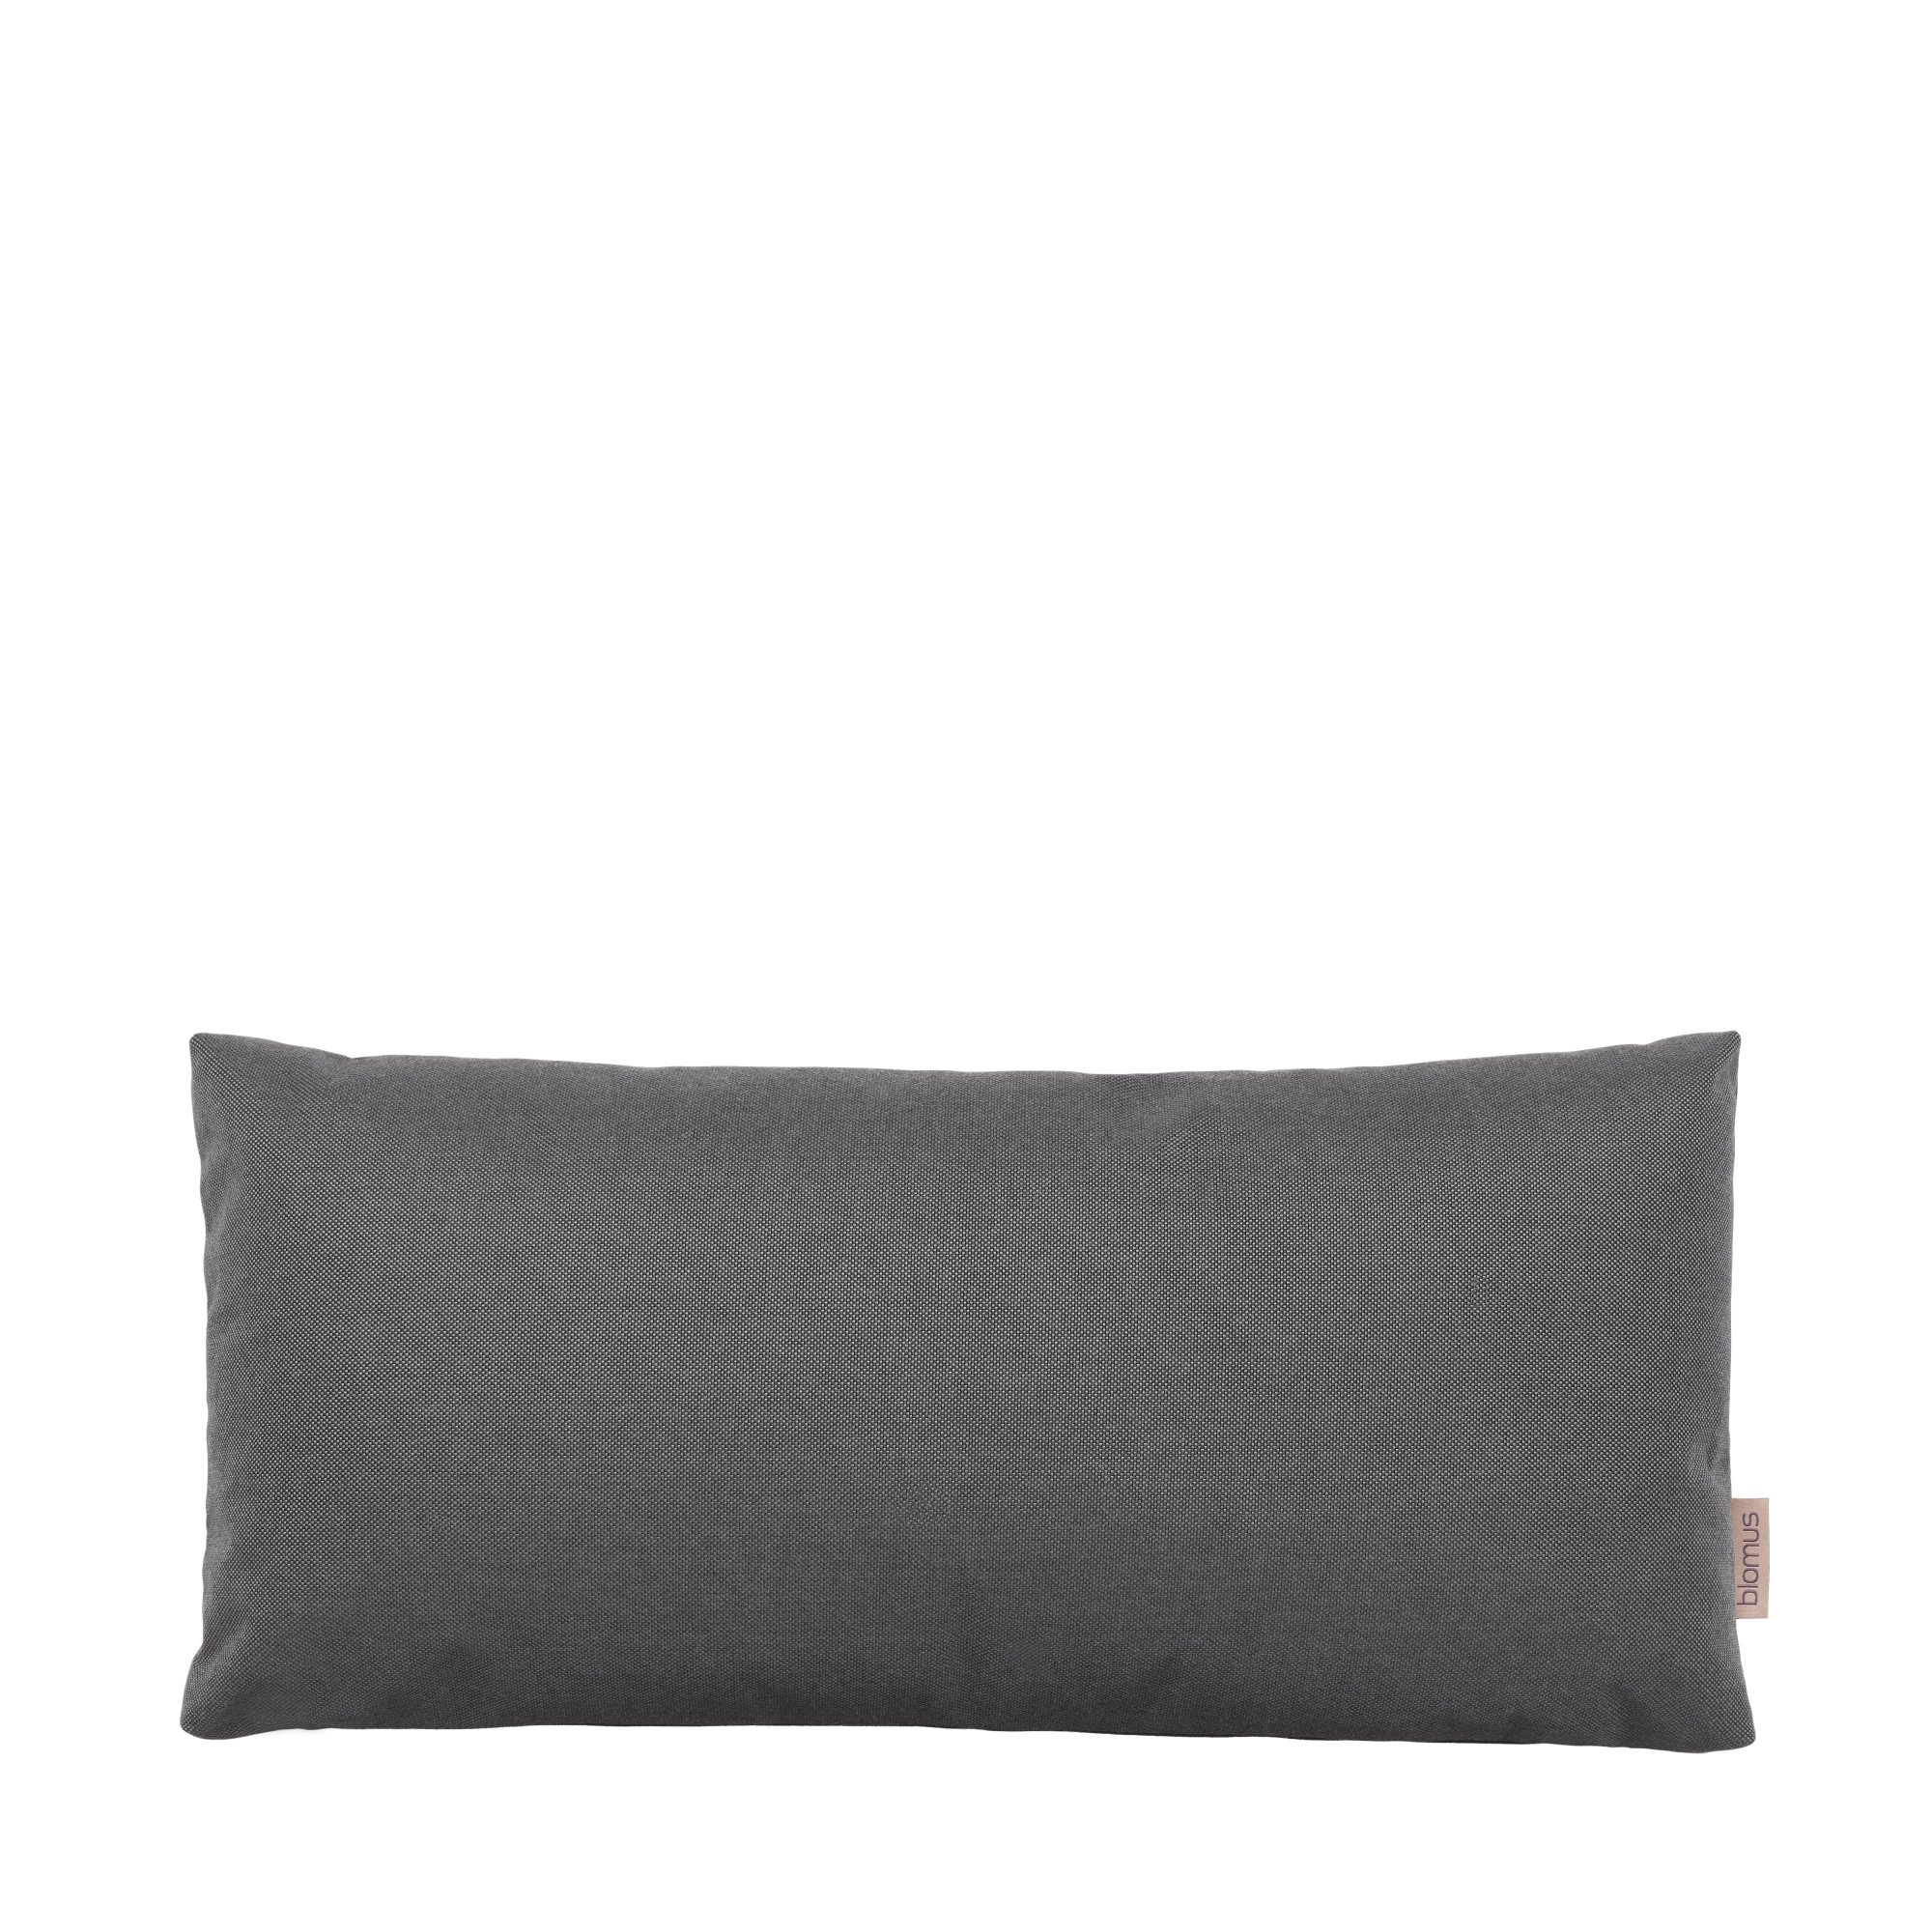 BLOMUS // STAY - OUTDOOR PILLOW | 70 x 30 cm